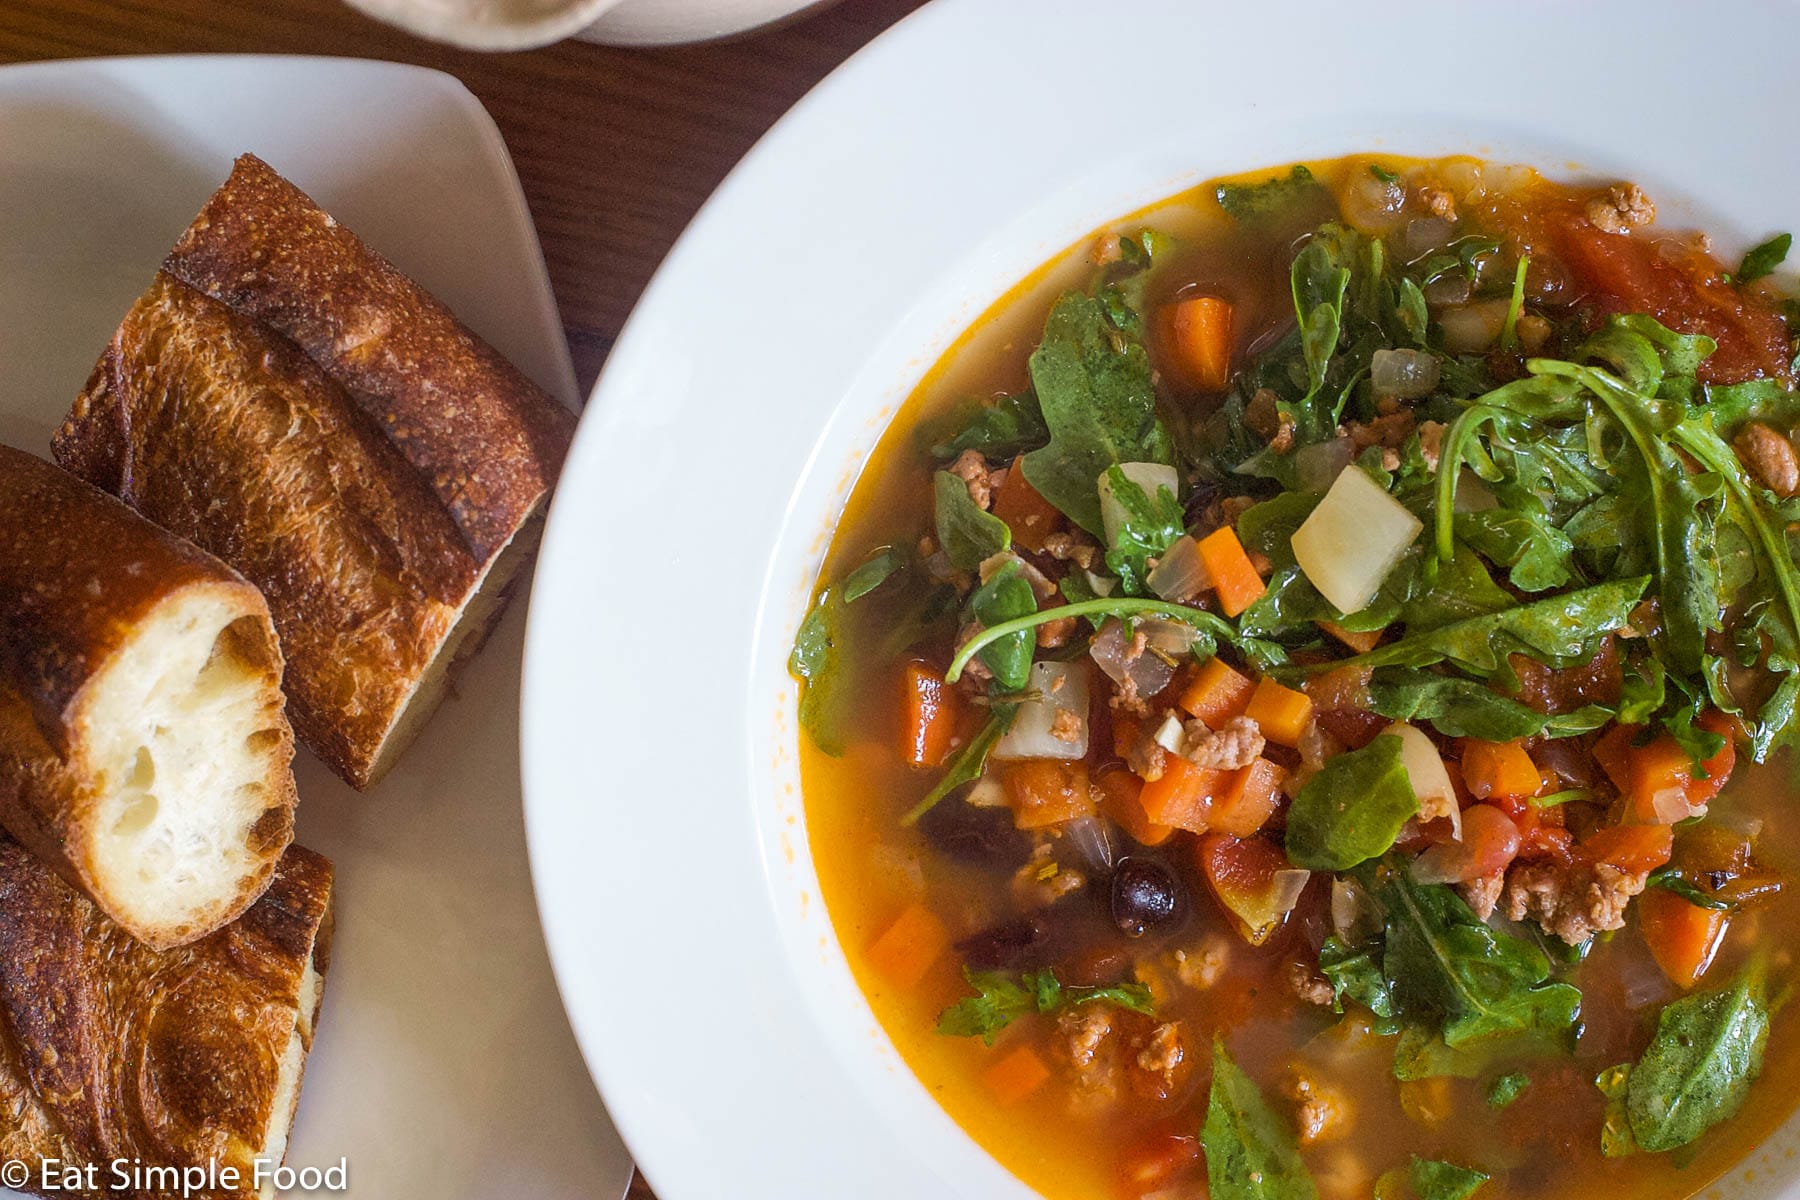 White bowl of tomato based soup with sausage, carrots, arugula, and white beans. Spoon and baguette on the side.